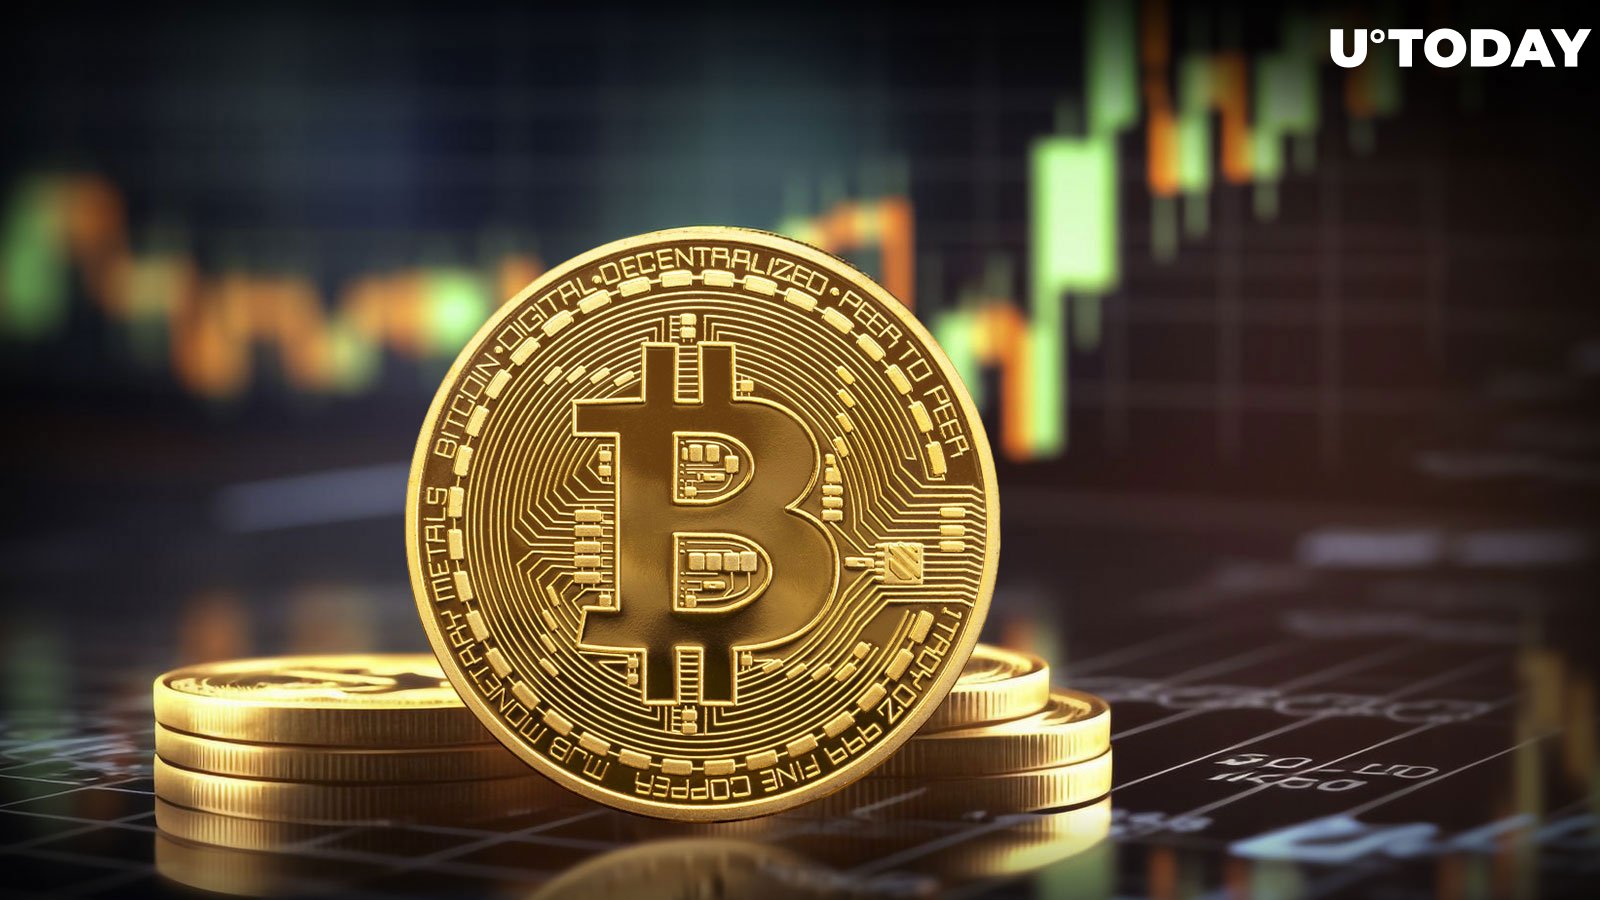 Bitcoin on track for record monthly candle of $22,000